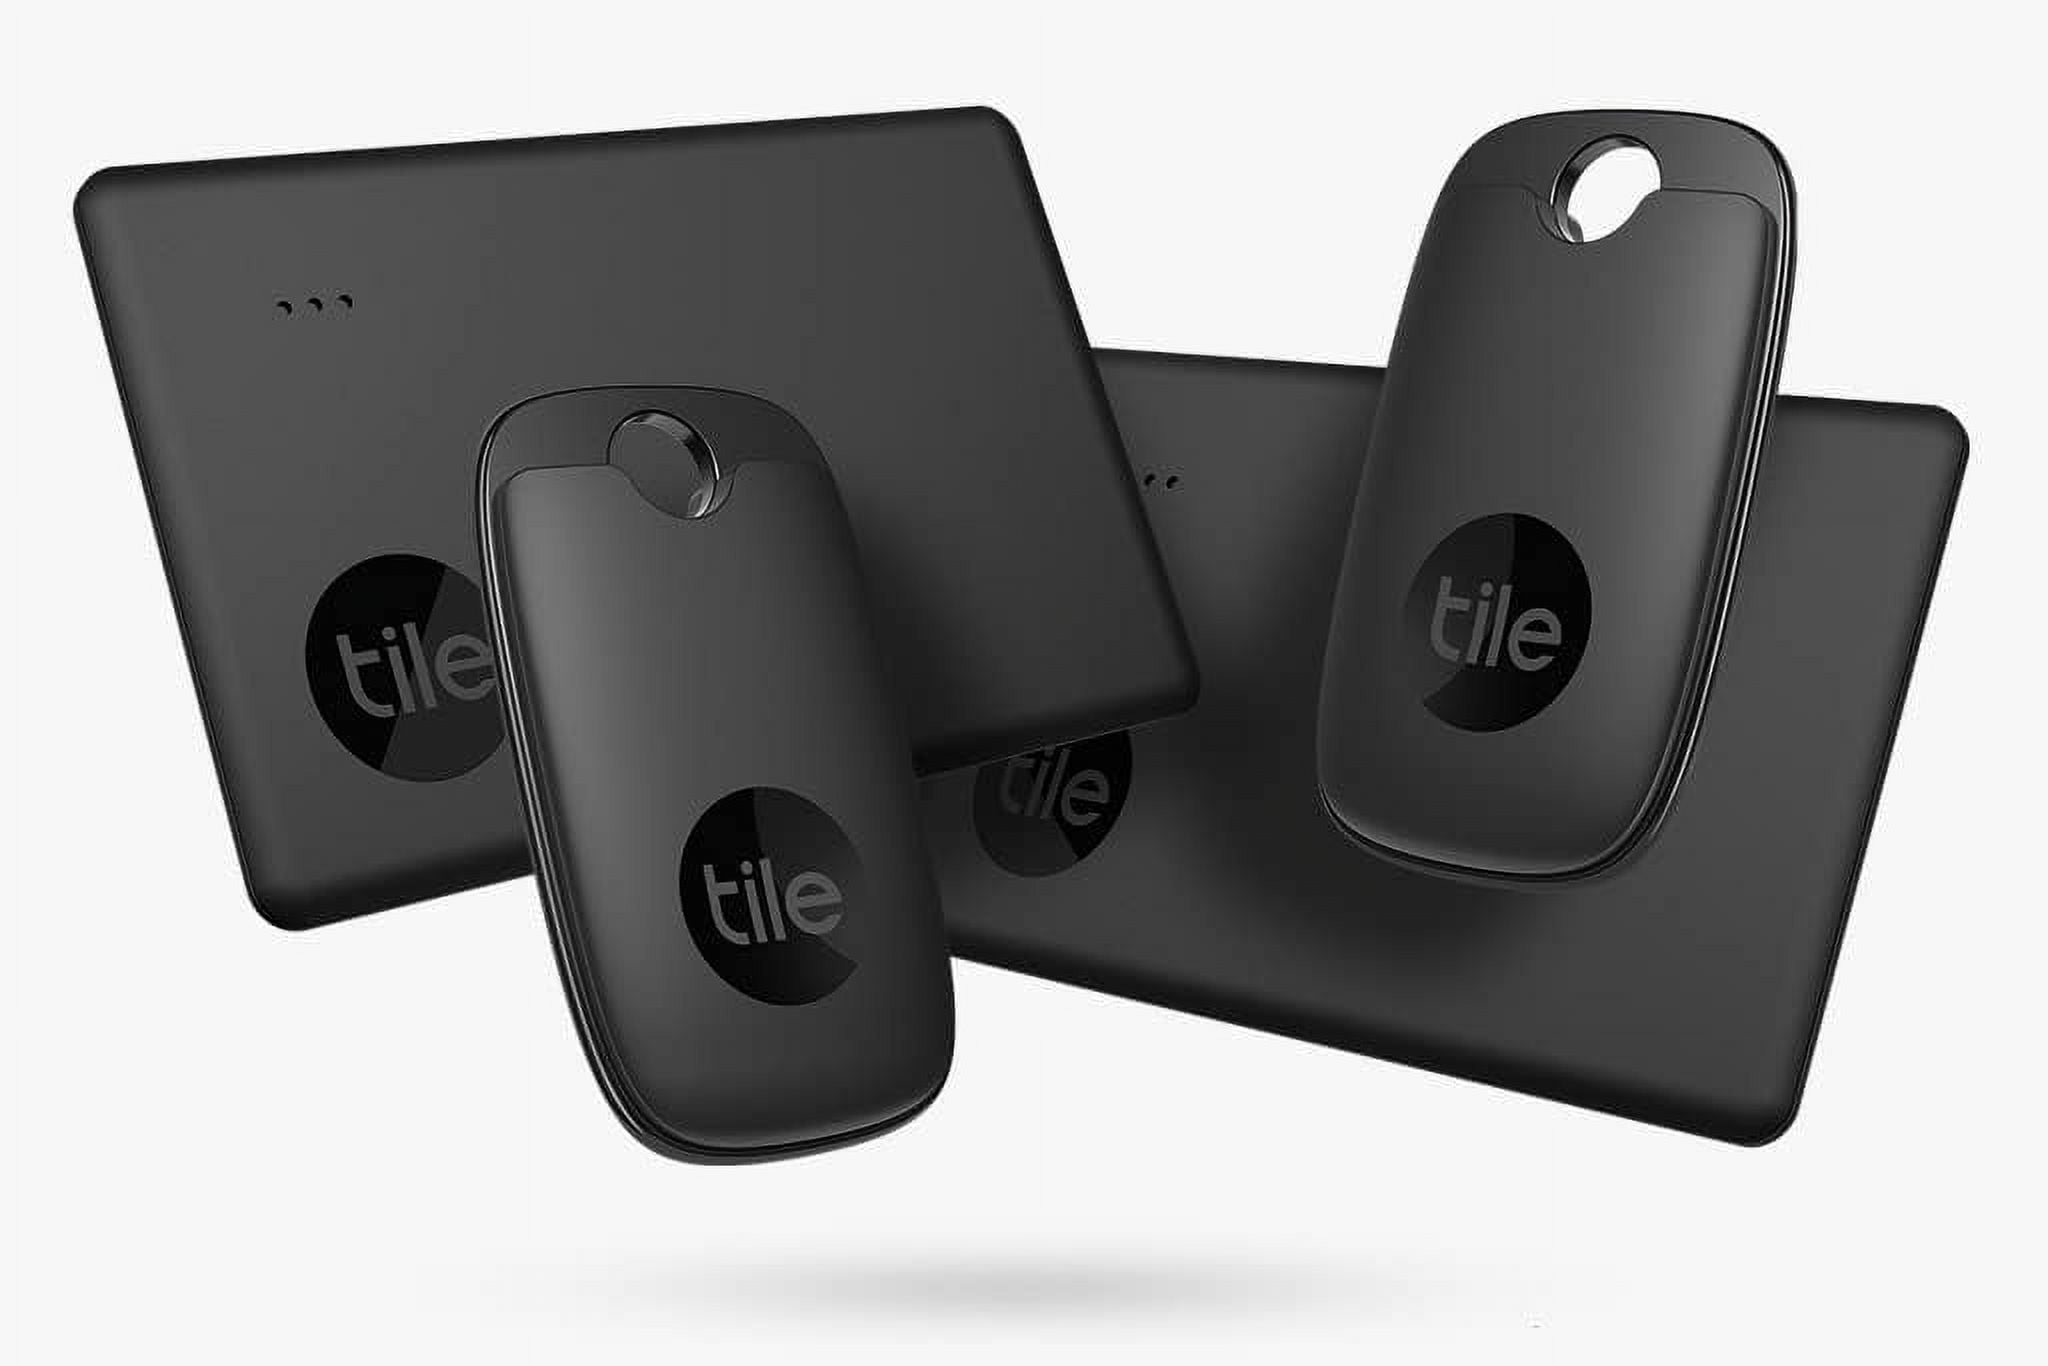 Tile partners with BLE chip makers to bring its location-tracking  technology to more products